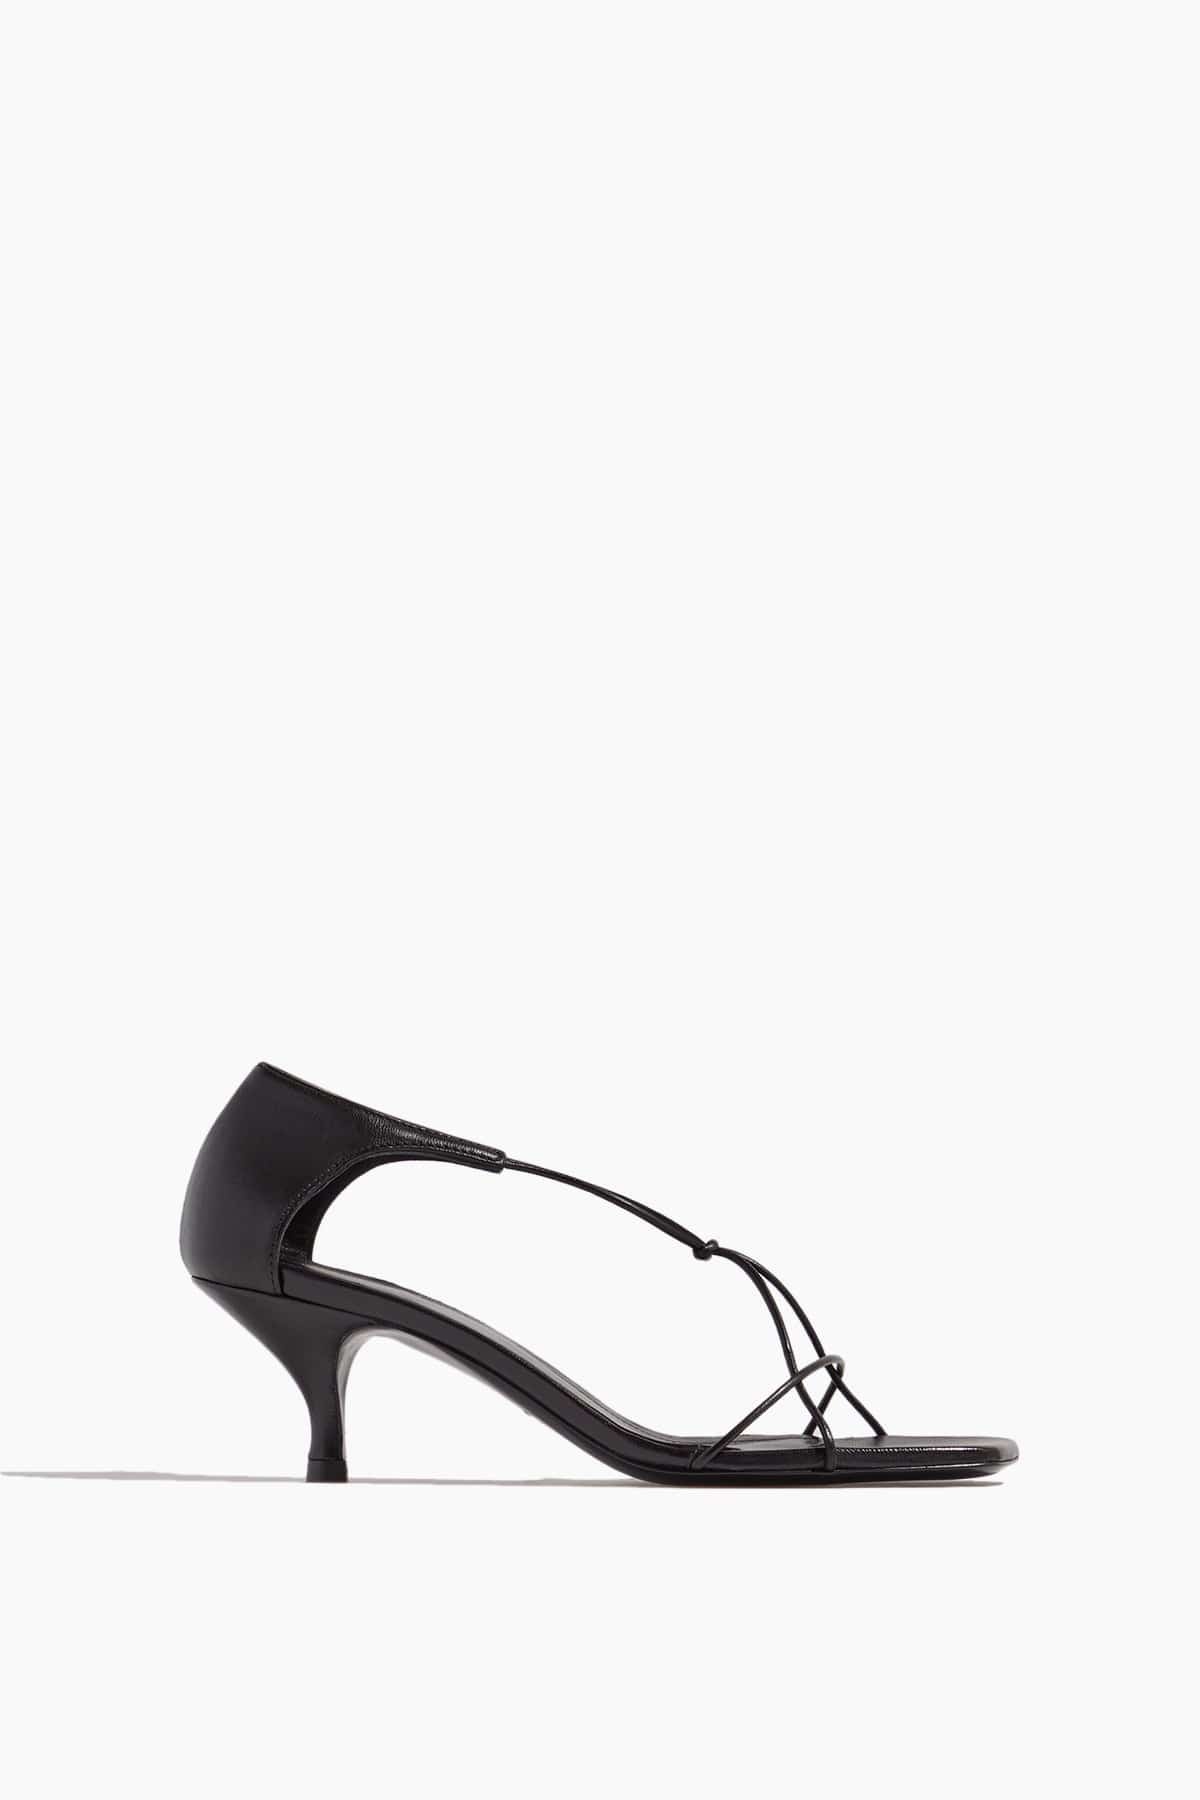 The Leather Knot Sandal in Black - 1